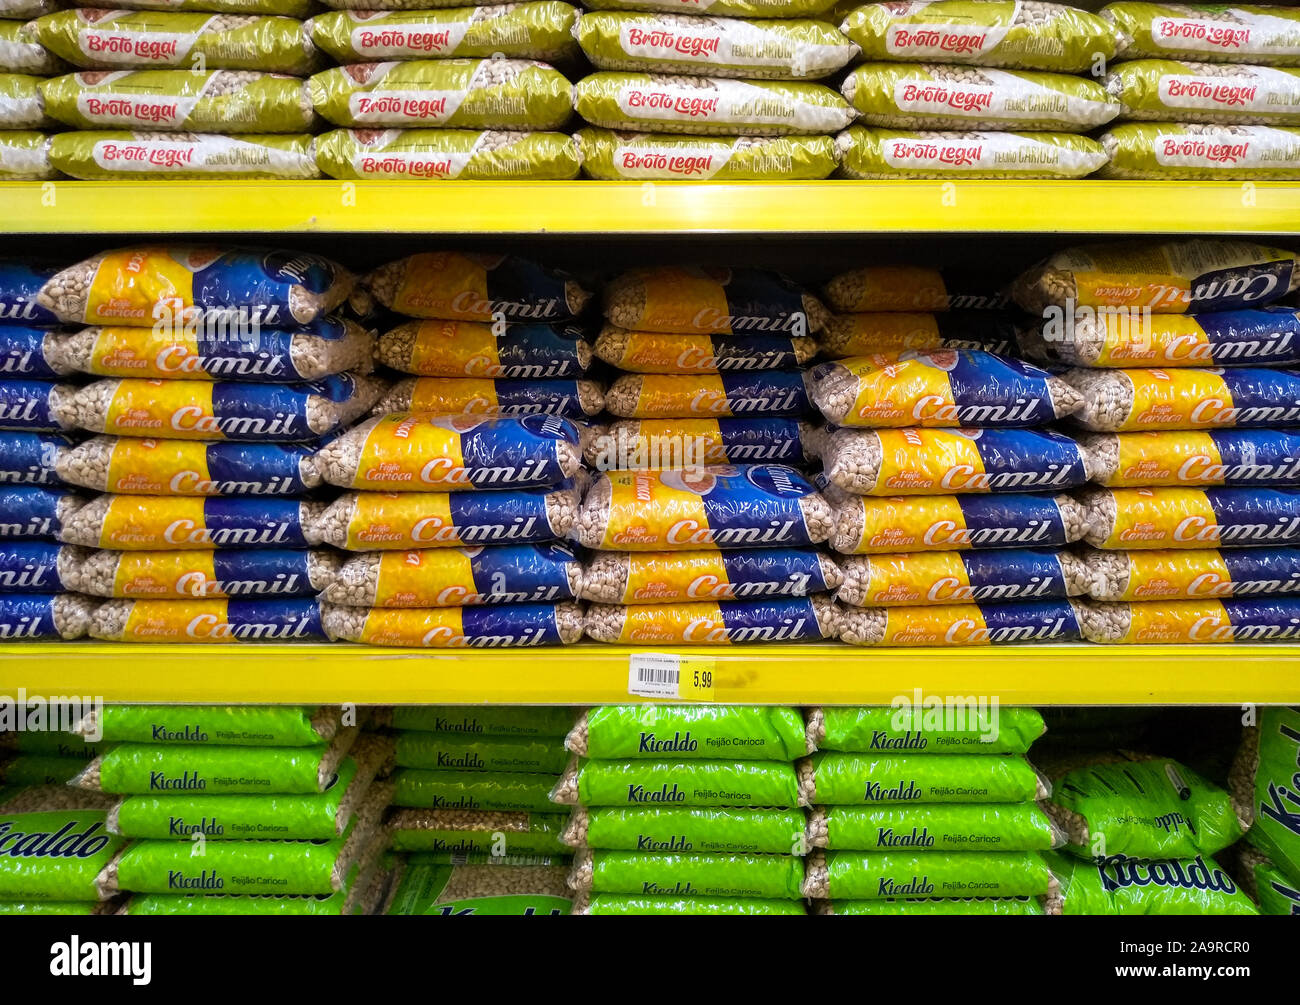 São Paulo, SP / Brazil - 16 November 2019: Bean bags of many different brands in shelves in São Paulo, Brazil with price tags Stock Photo